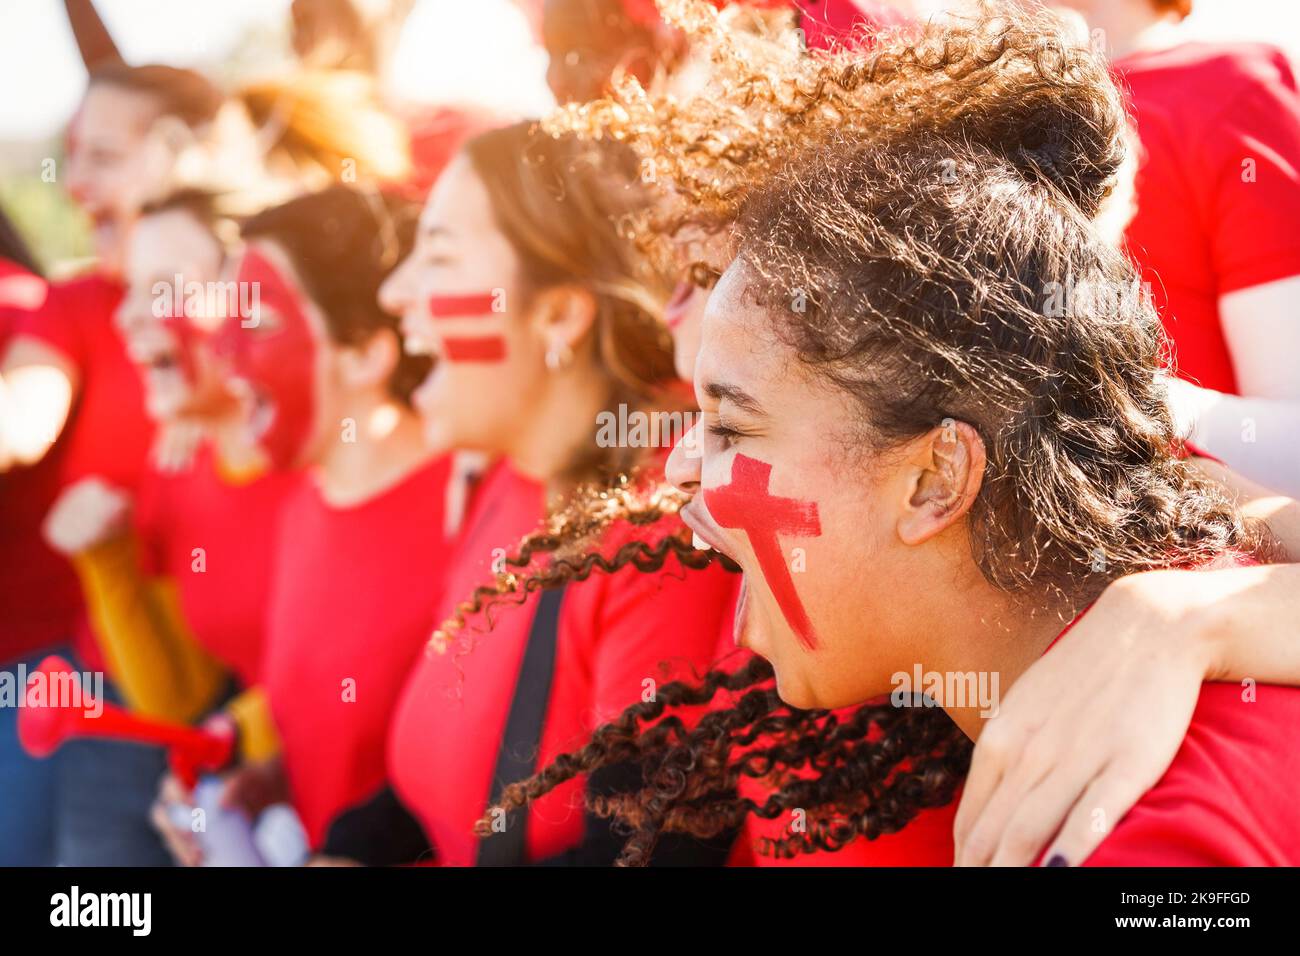 Multiracial red sport fans screaming while supporting their team - Football supporters having fun at competition event - Focus on african girl face Stock Photo